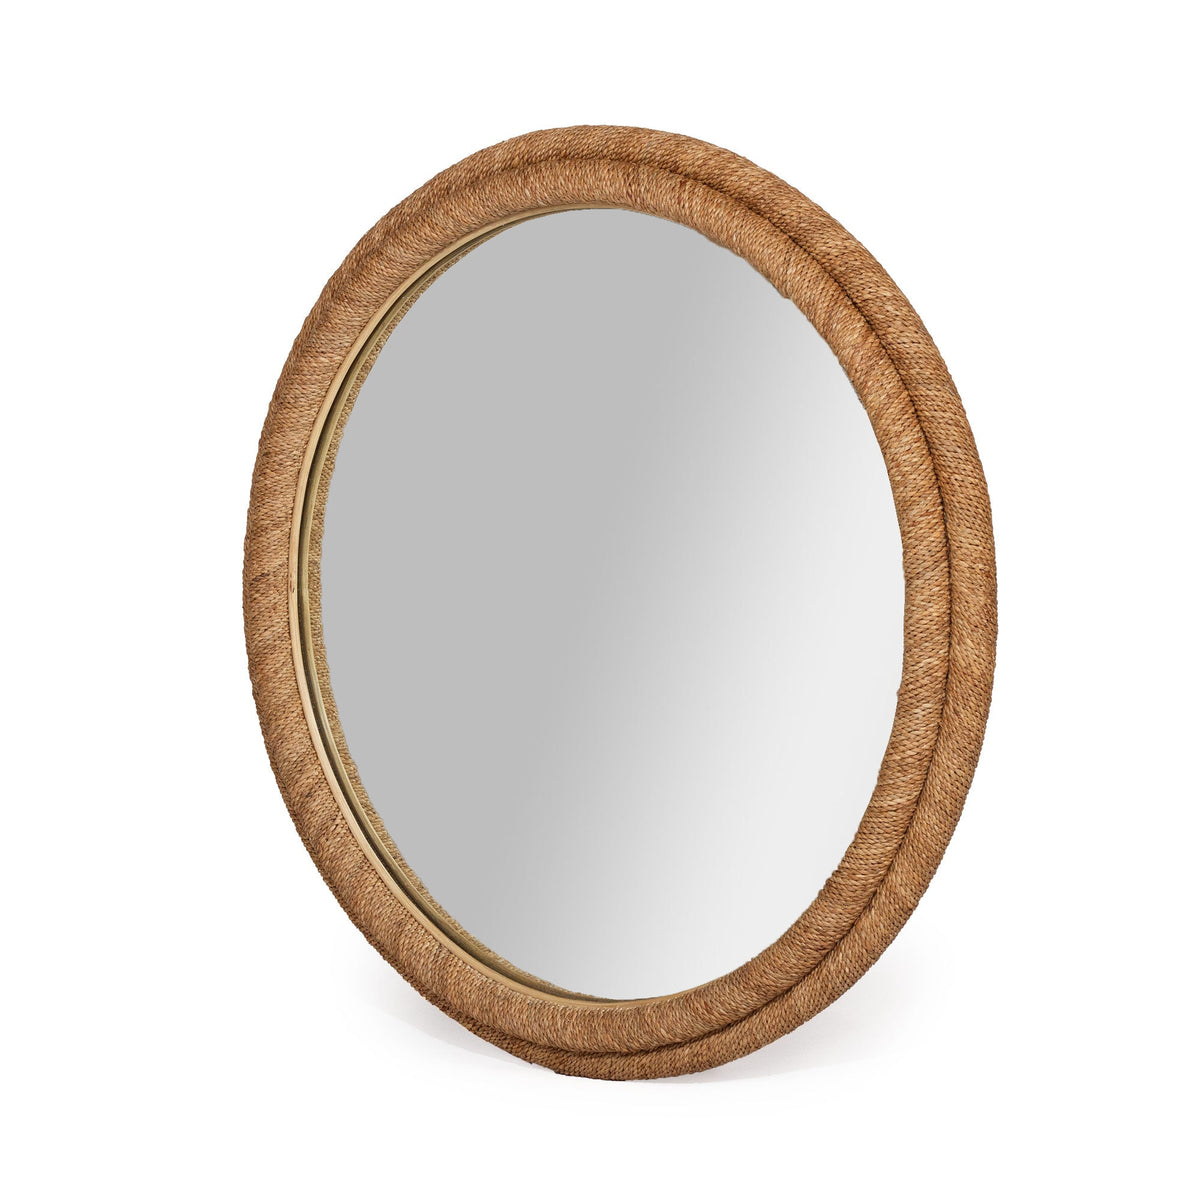 Chloe Rope Frame Round Wall Mirror, Quad Rope, 90cm - Natural